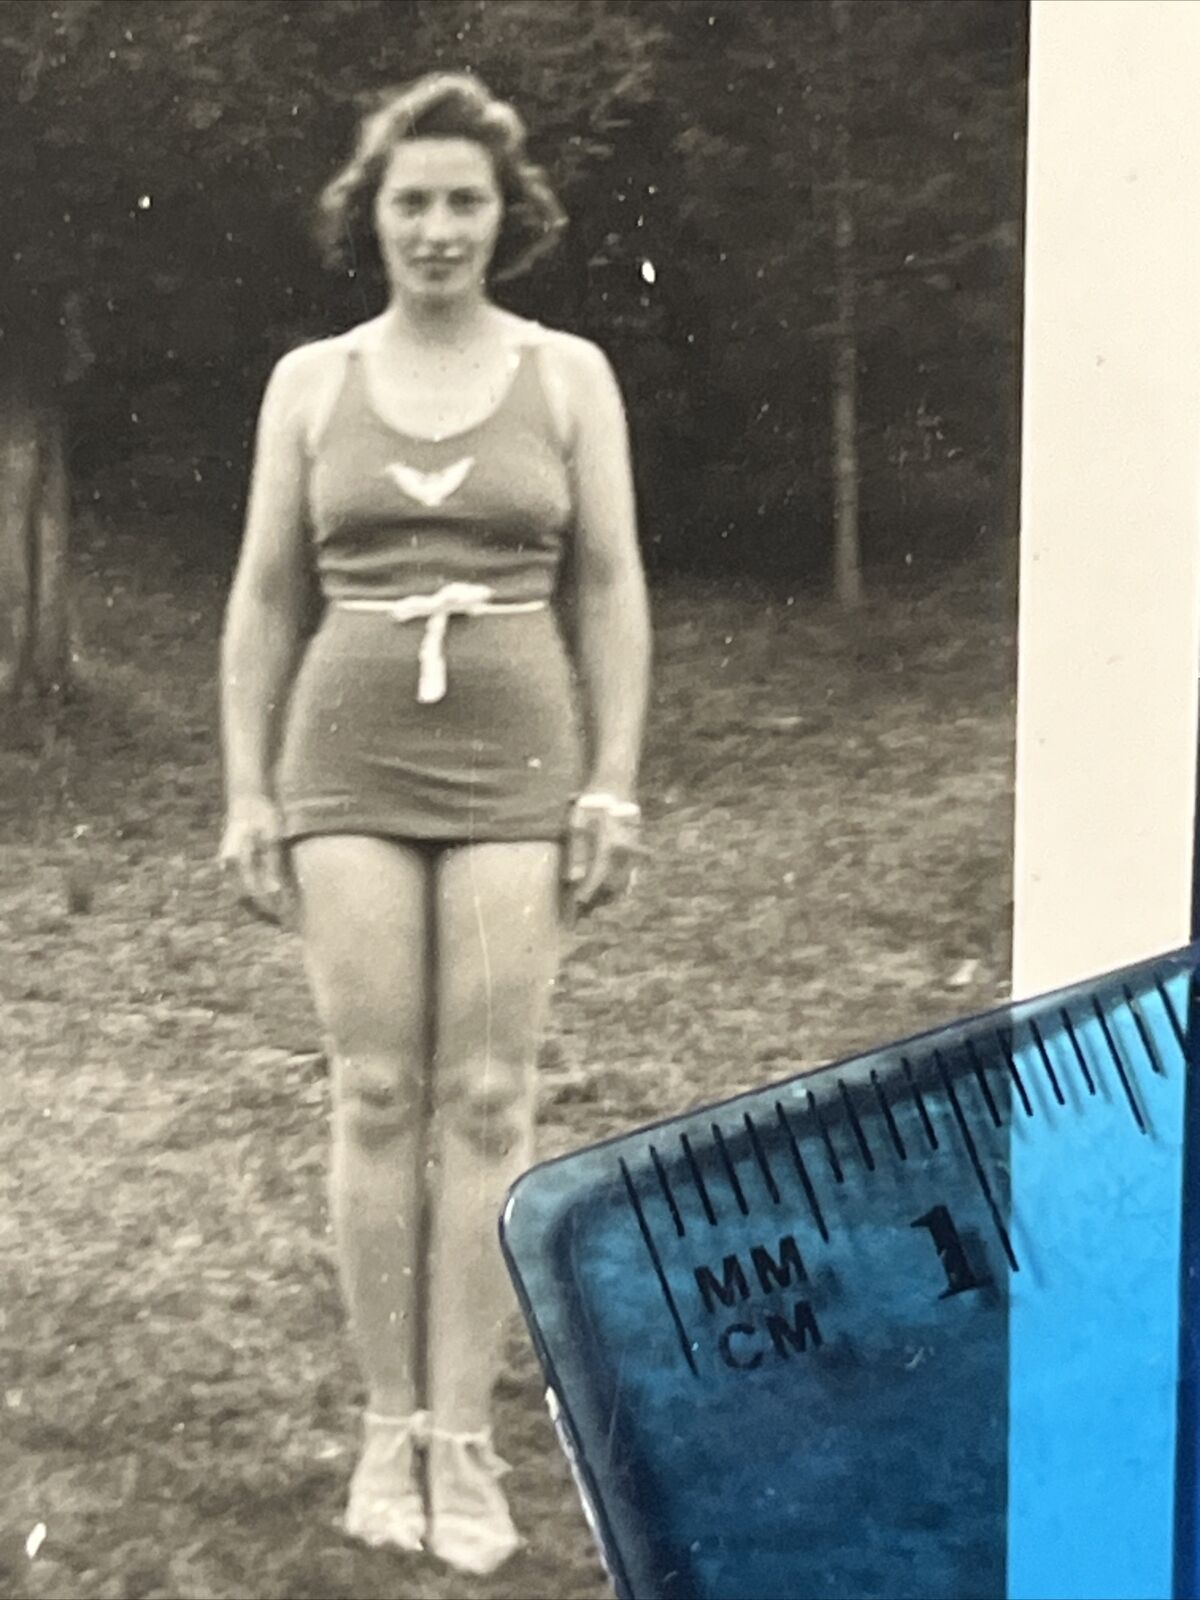 WOMAN in BATHING SUIT Figure 1940 PHOTO .99 CENTS .89 postage Great IMAGE USA